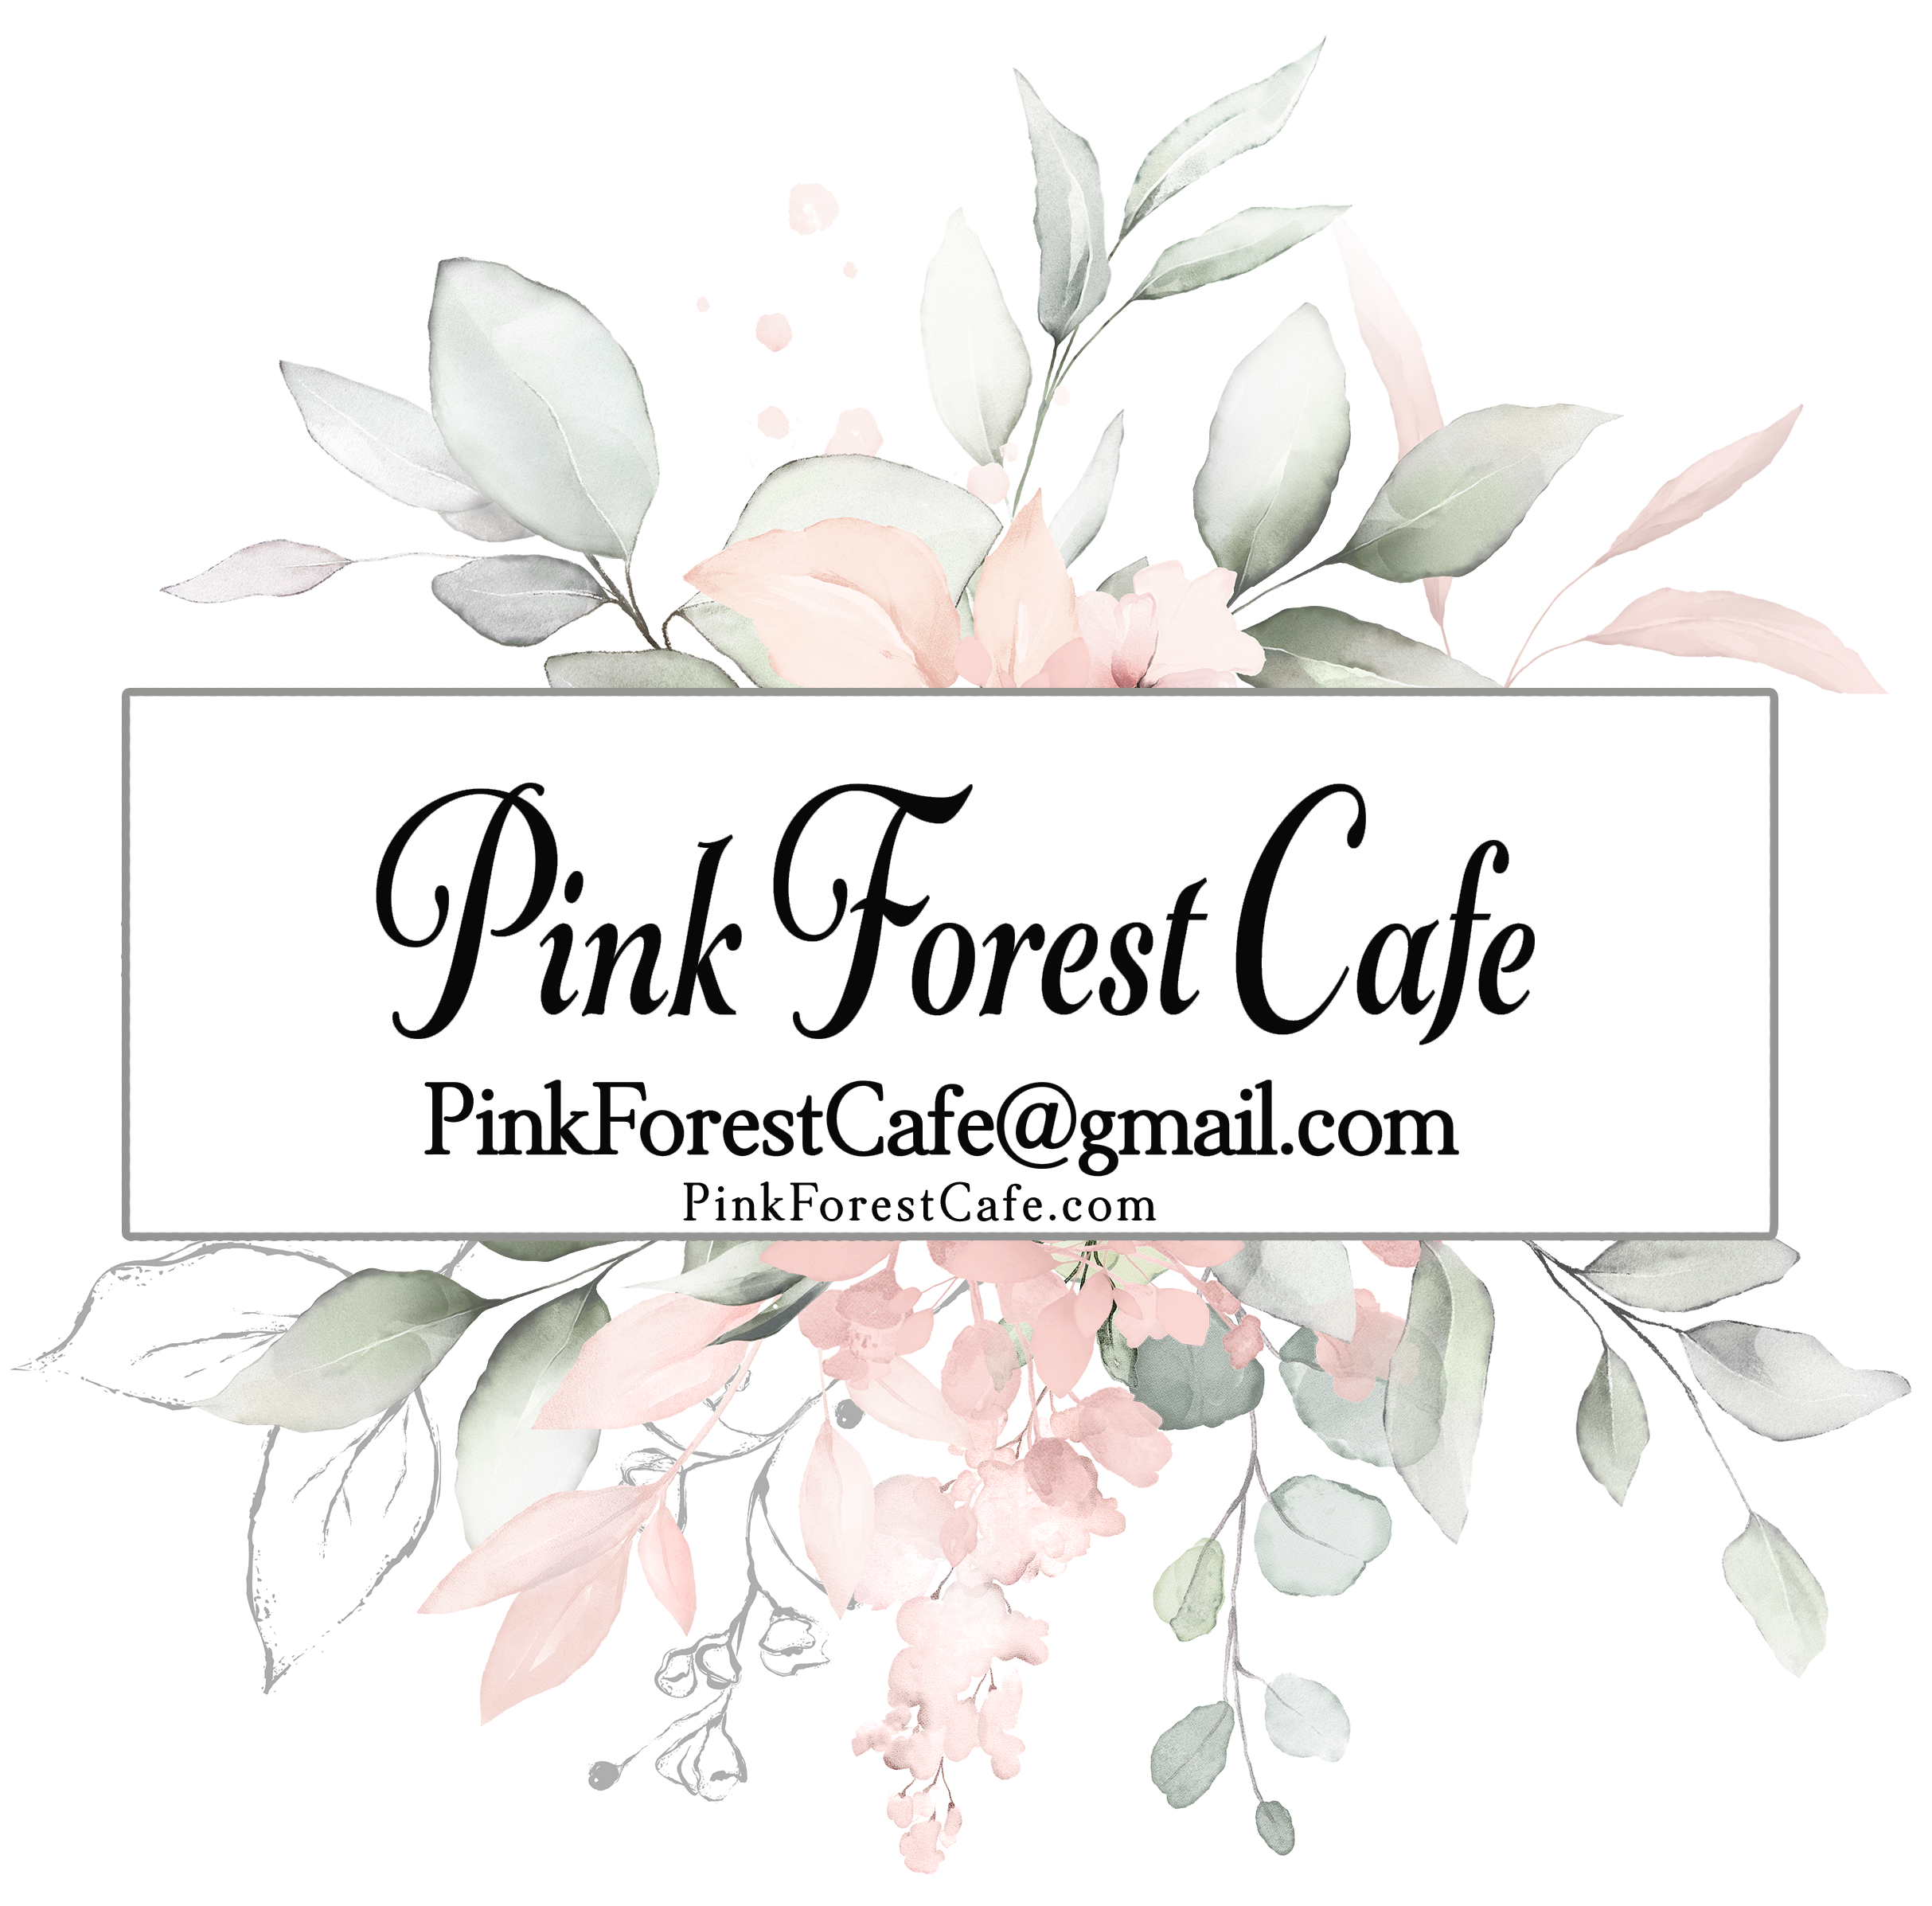 Order My Print - Pink Forest Cafe - 5 (Five) Prints - 5 Designs Printed and Shipped